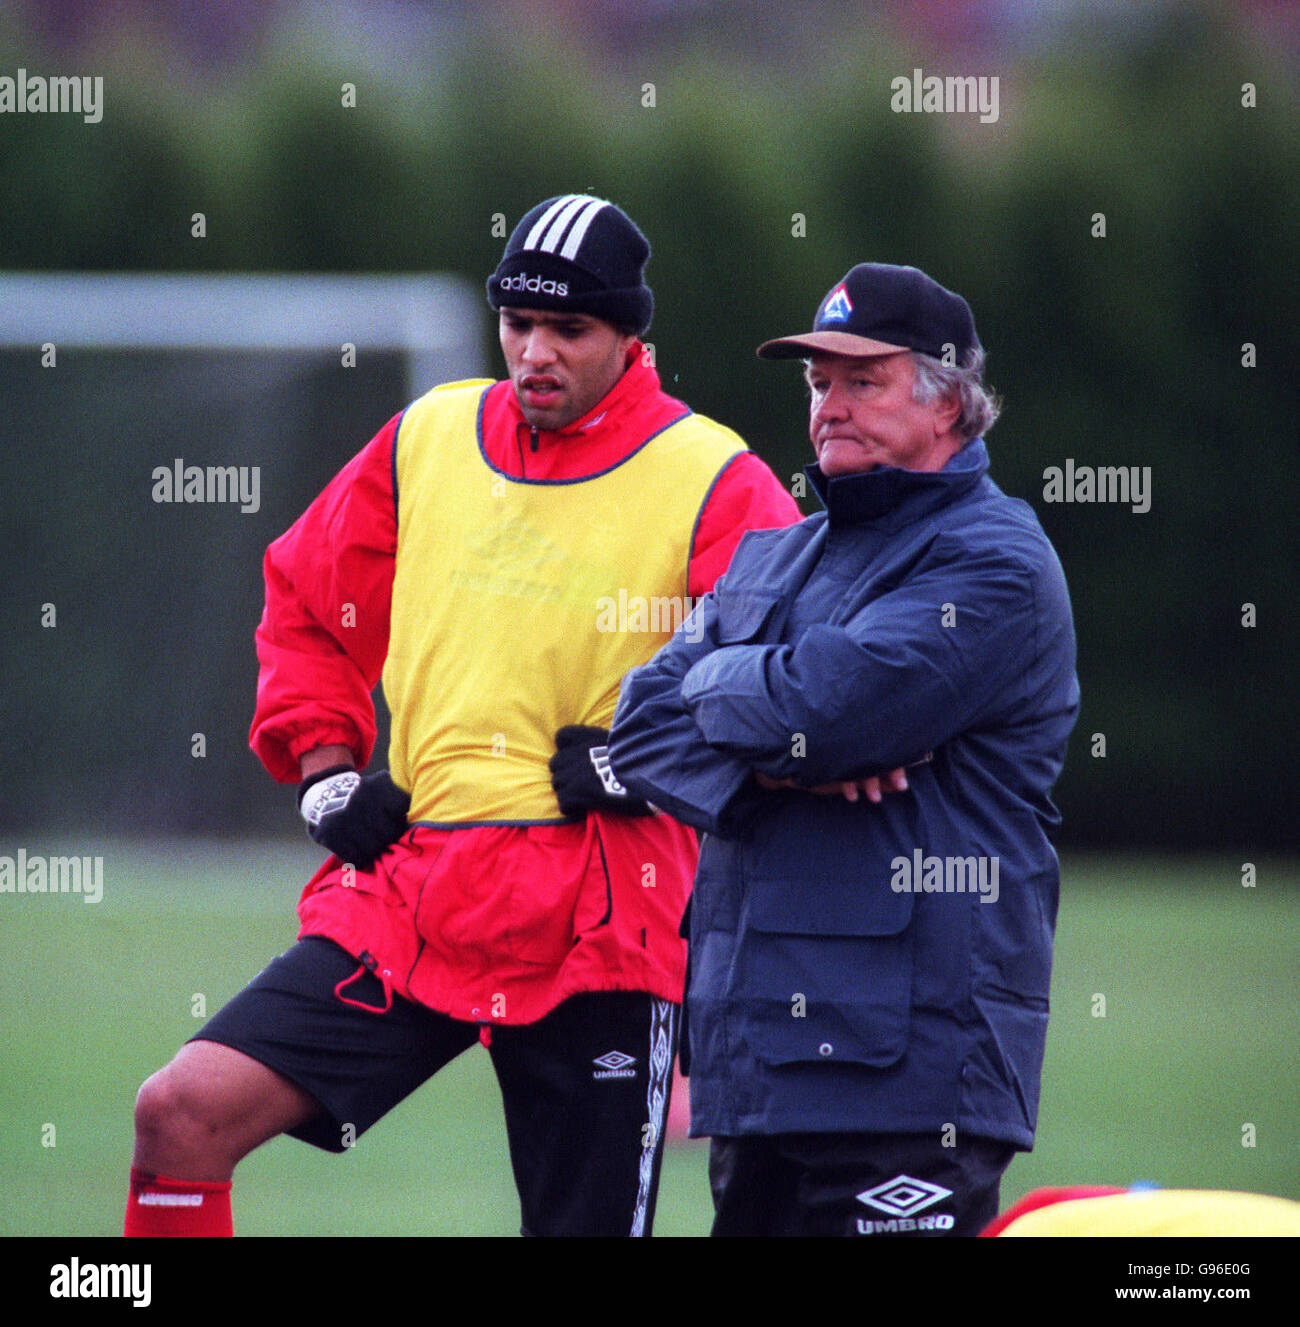 Soccer - FA Carling Premiership - Nottingham Forest Training. Ron Atkinson, (r) Nottingham Forest Manager directs training as Pierre Van Hooijdonk (l) looks on Stock Photo